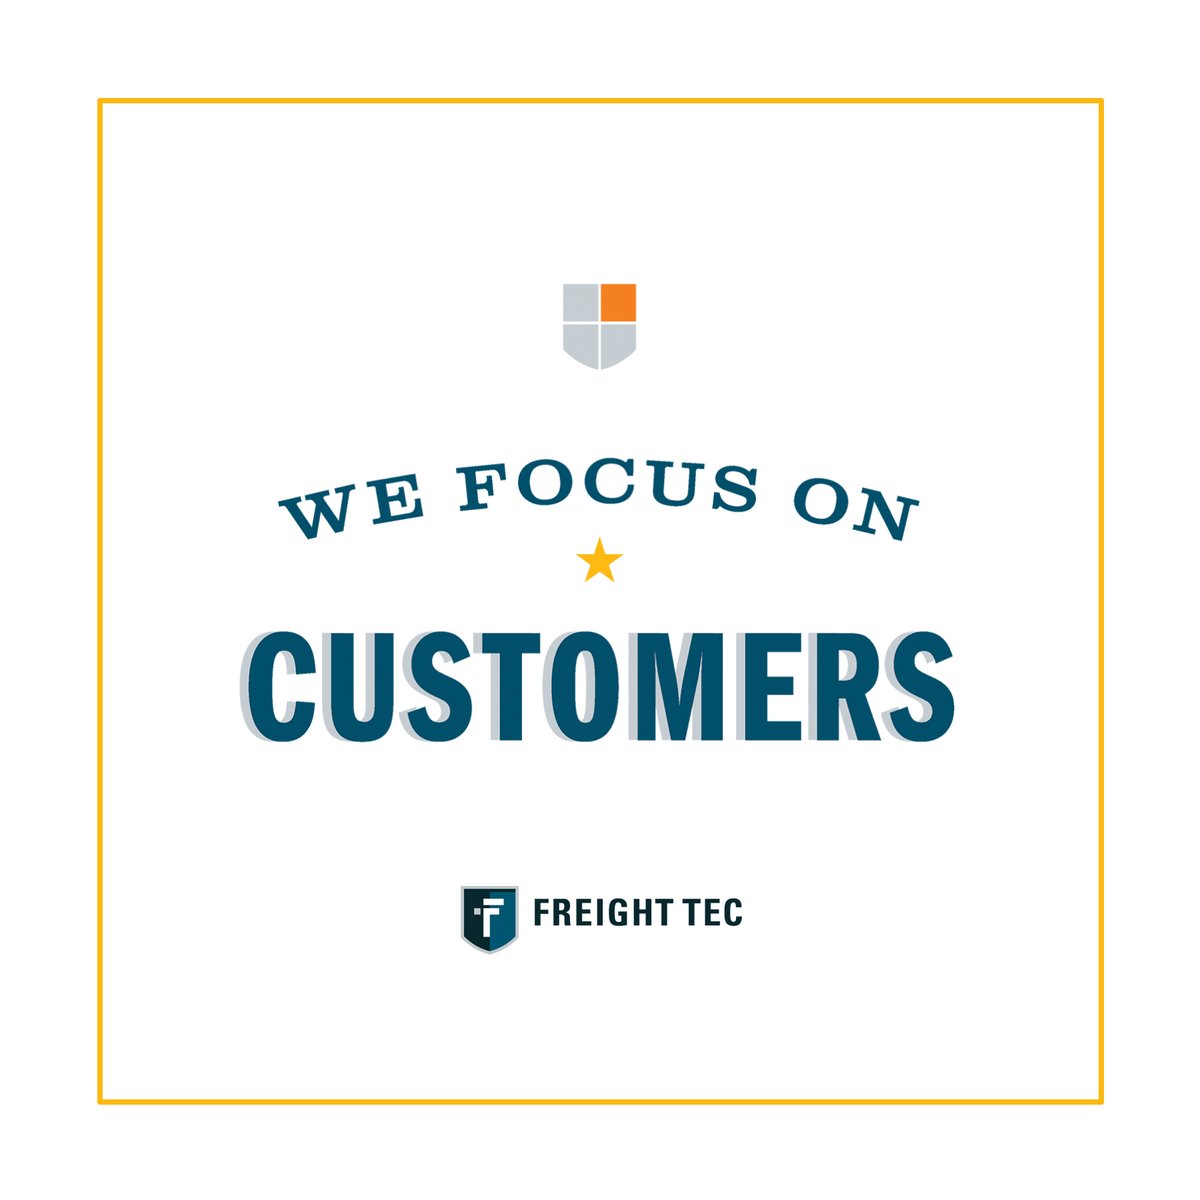 We focus on customers! 🤝 We are committed to our work and customers & do all we can to provide exceptional service and support. 🎧  #corevalue #freightbroker #freighttec #bestagentprogram #freightagent #freightbrokerage